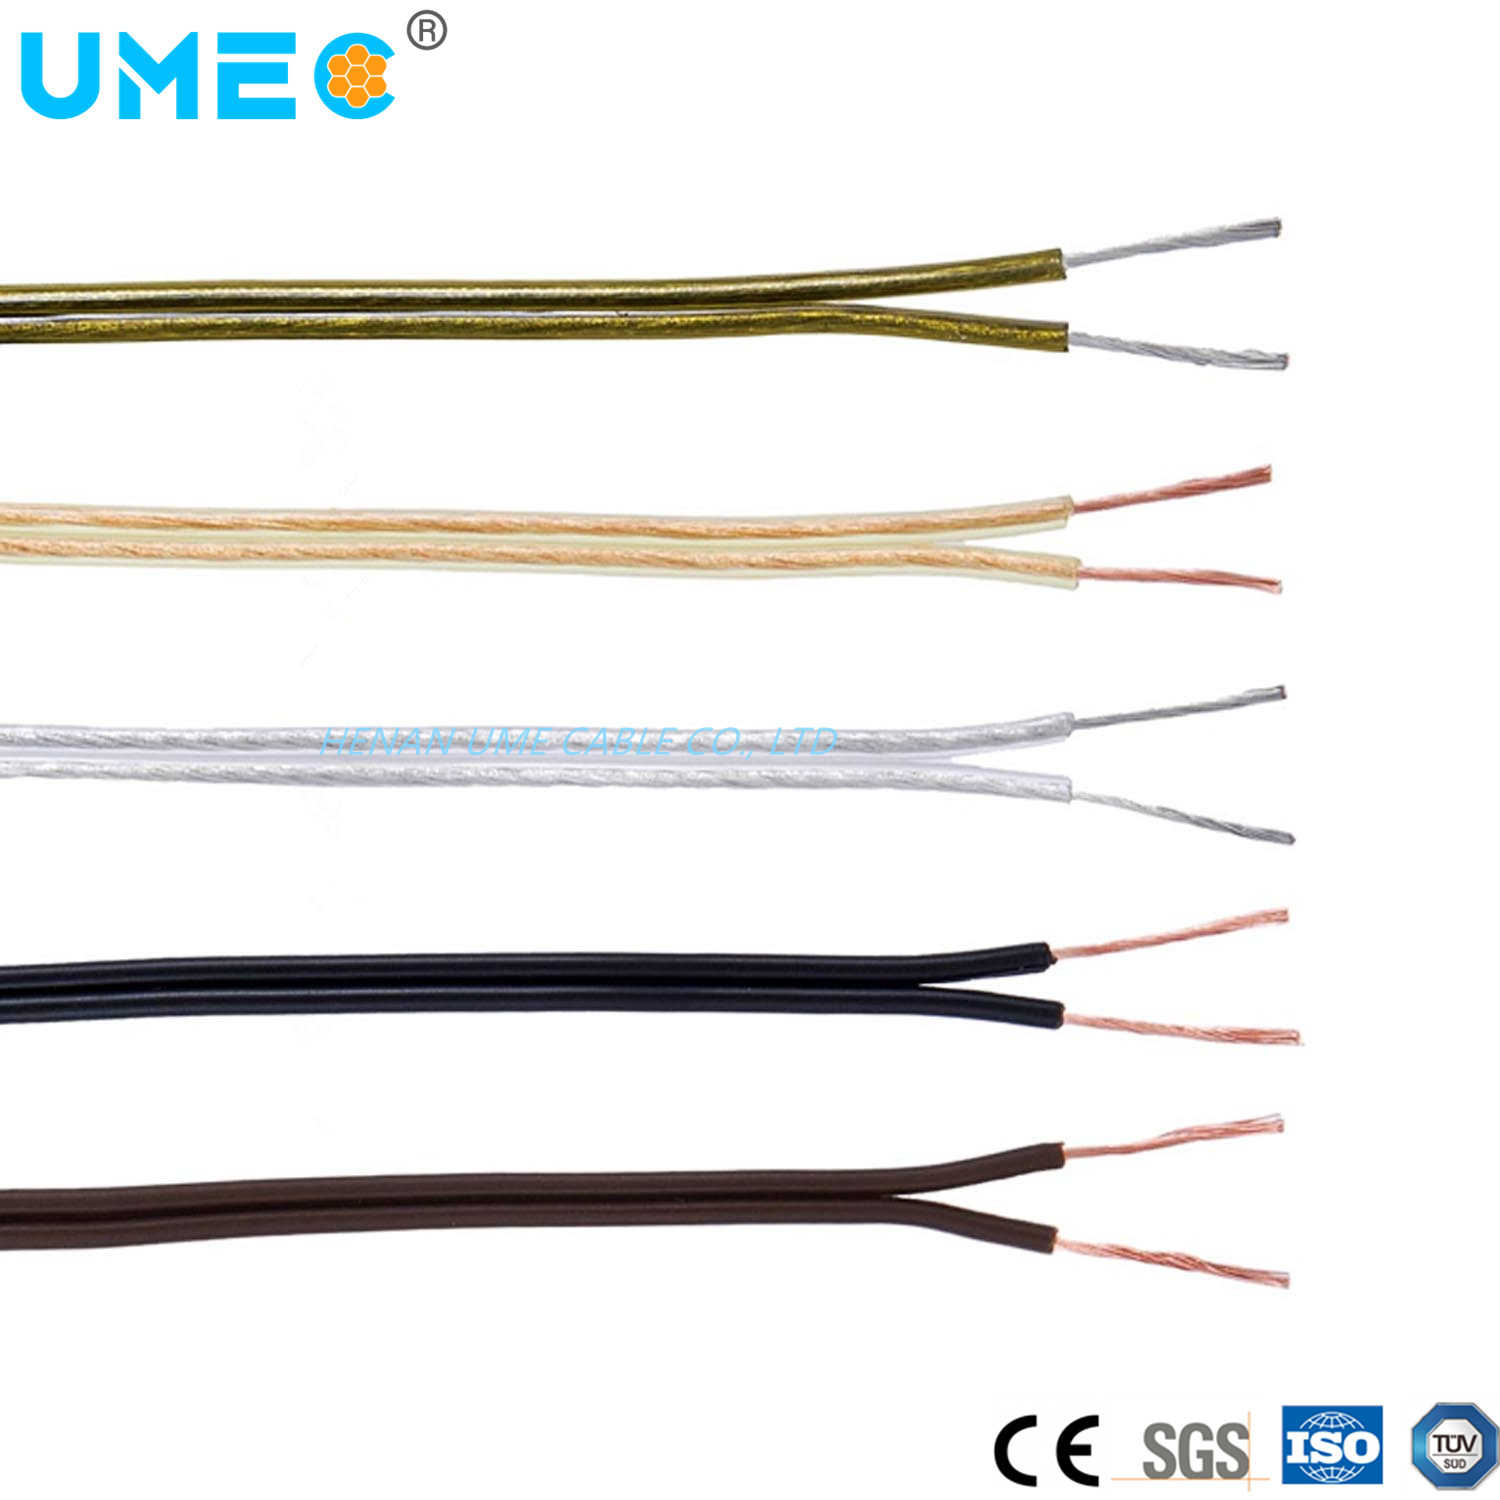 PVC Cord Single Twin Triplex Wire and Earth Connecting Cable 300V Underground Spt Spt-1 Spt-1W Spt-2W Light Cord